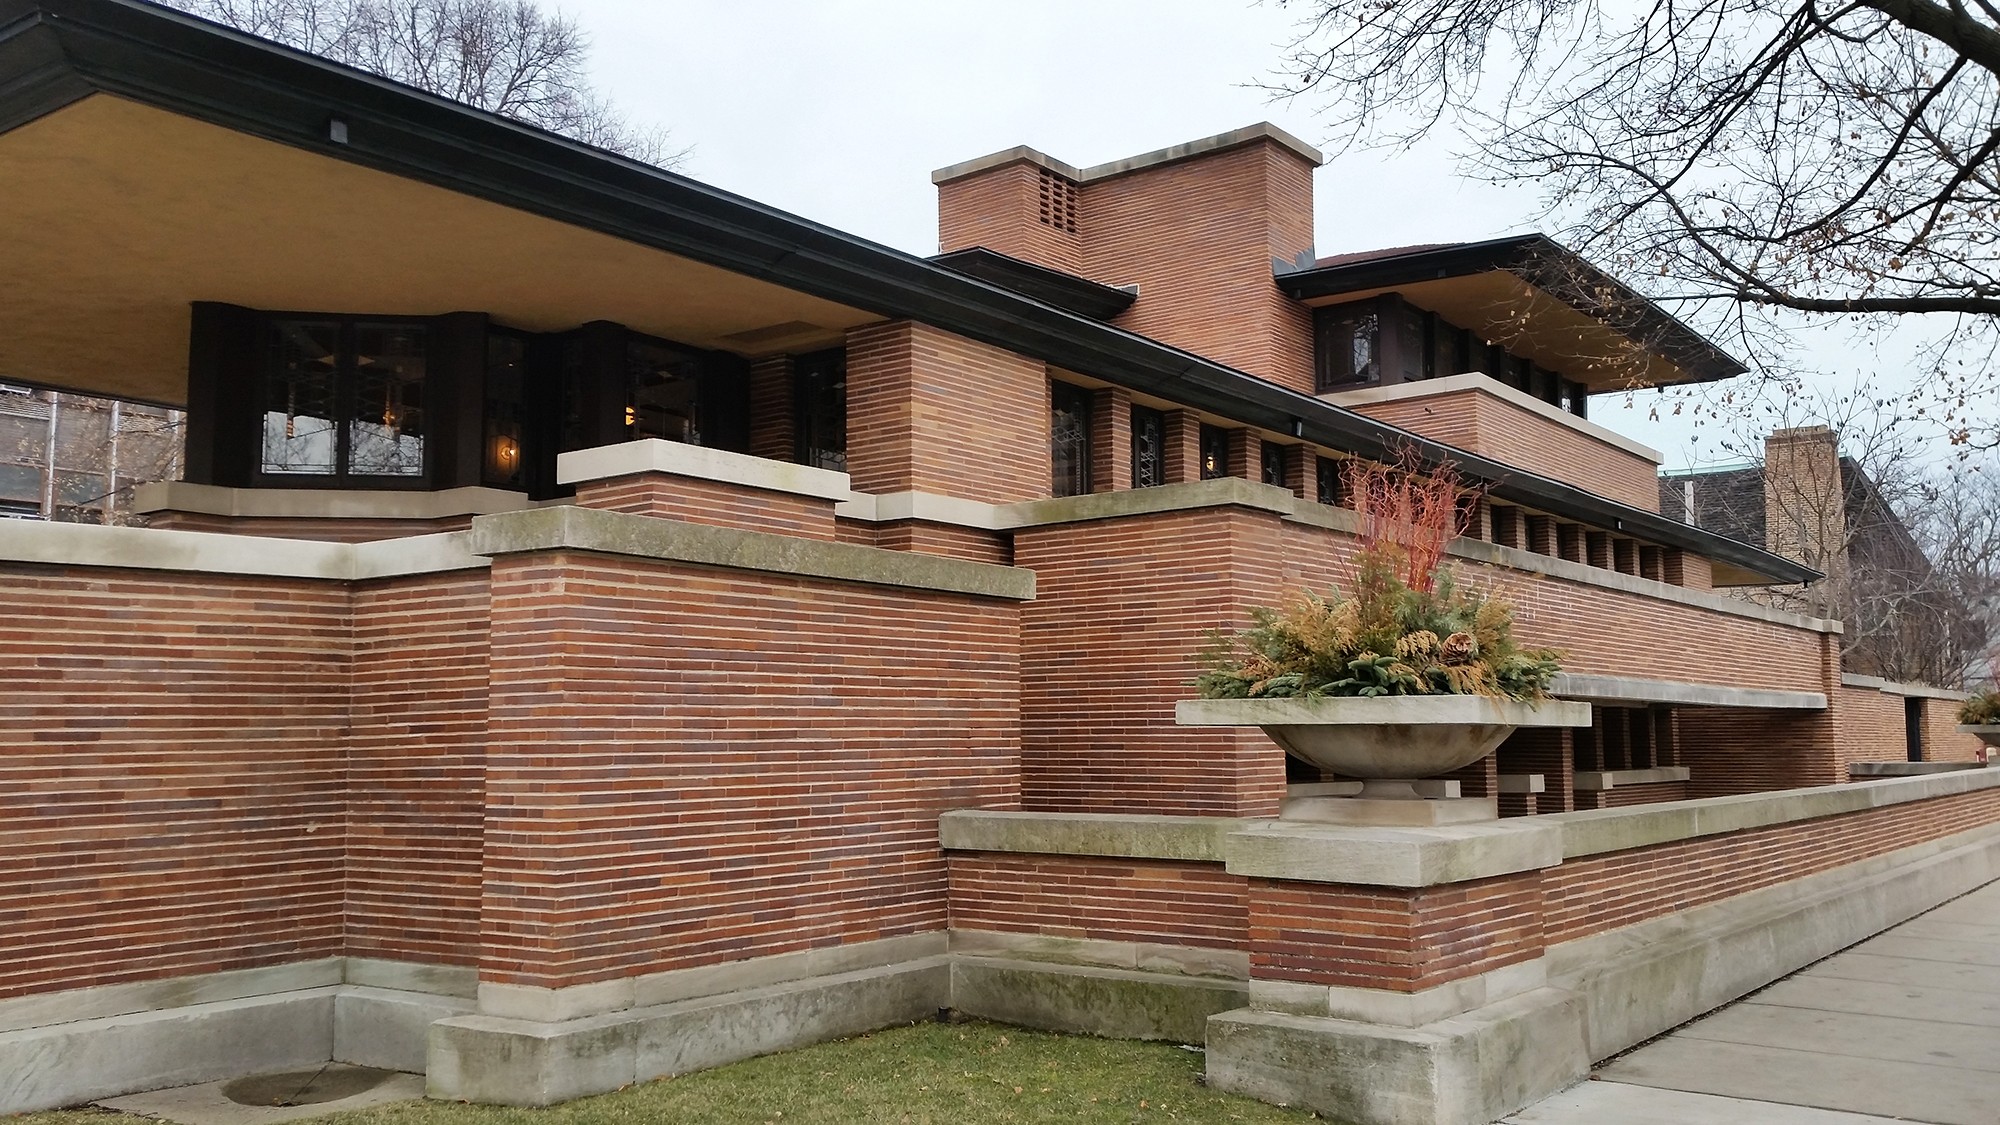 Monica also visited Robie House in Chicago, in addition to taking the Oak Park tours. 